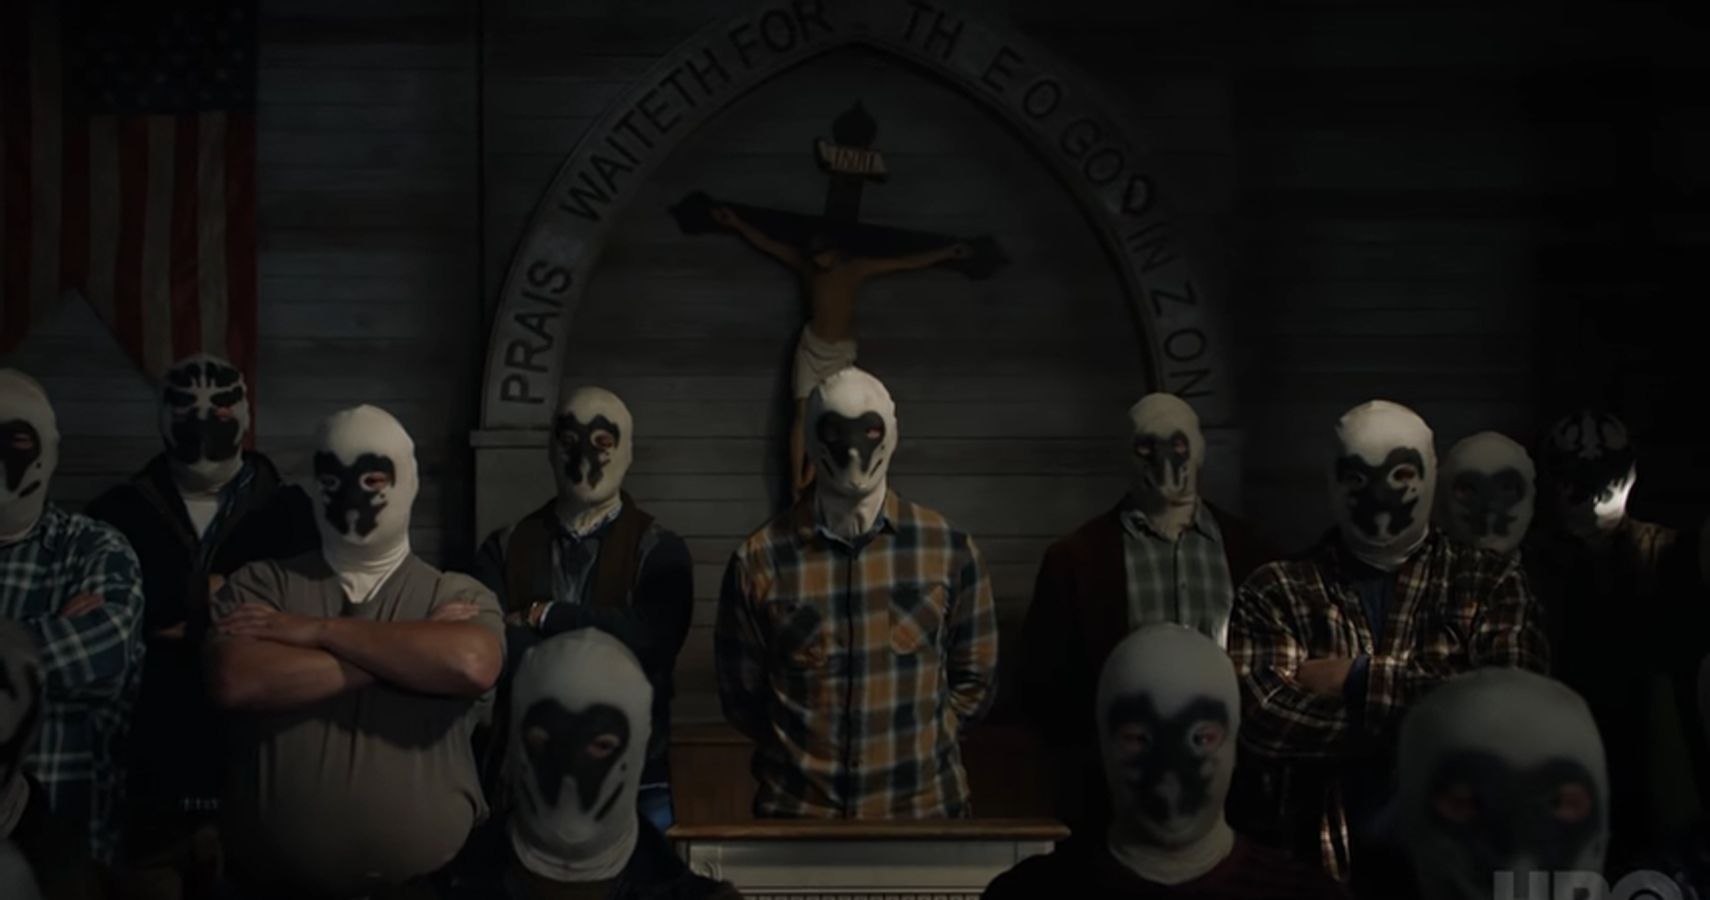 10 Questions We Have After Seeing The HBO Watchmen Trailer